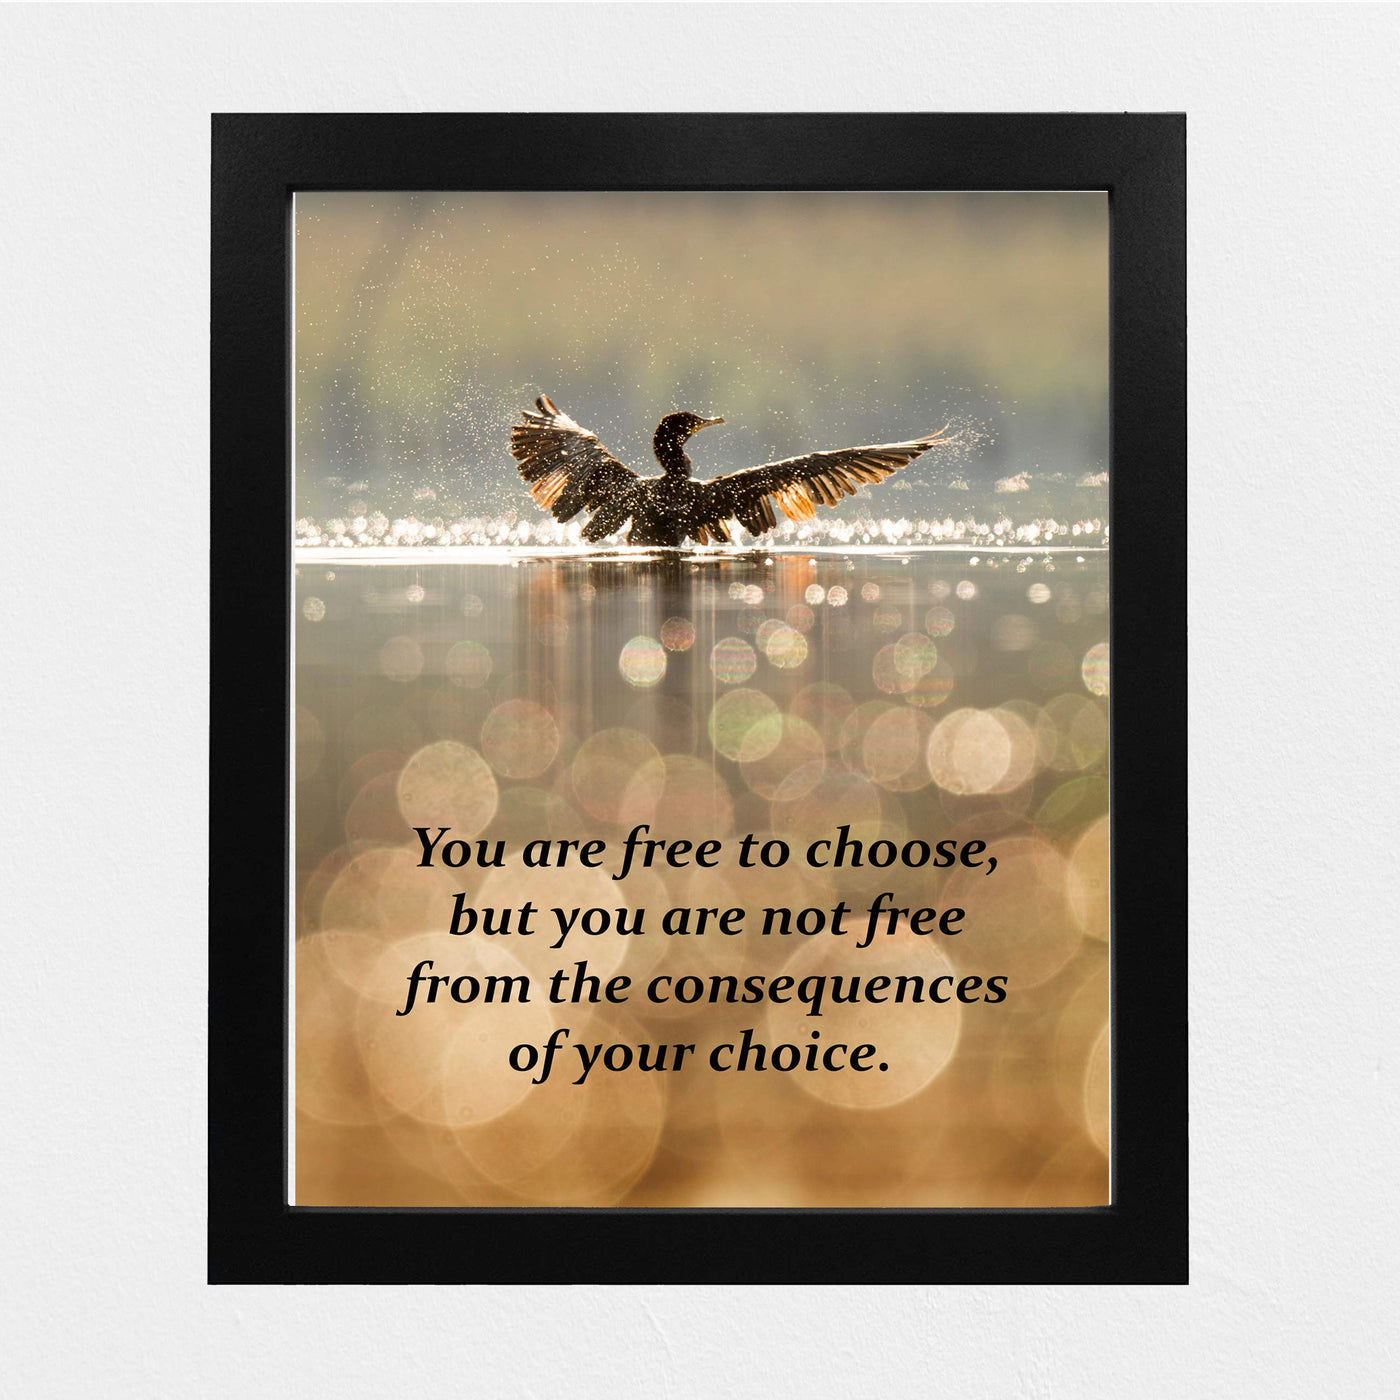 Free to Choose-Not Free From Consequences of Choice Motivational Quotes Wall Art -8 x 10" Modern Print w/Bird Landing in Lake Image-Ready to Frame. Home-Office-Studio-School Decor. Great Advice!